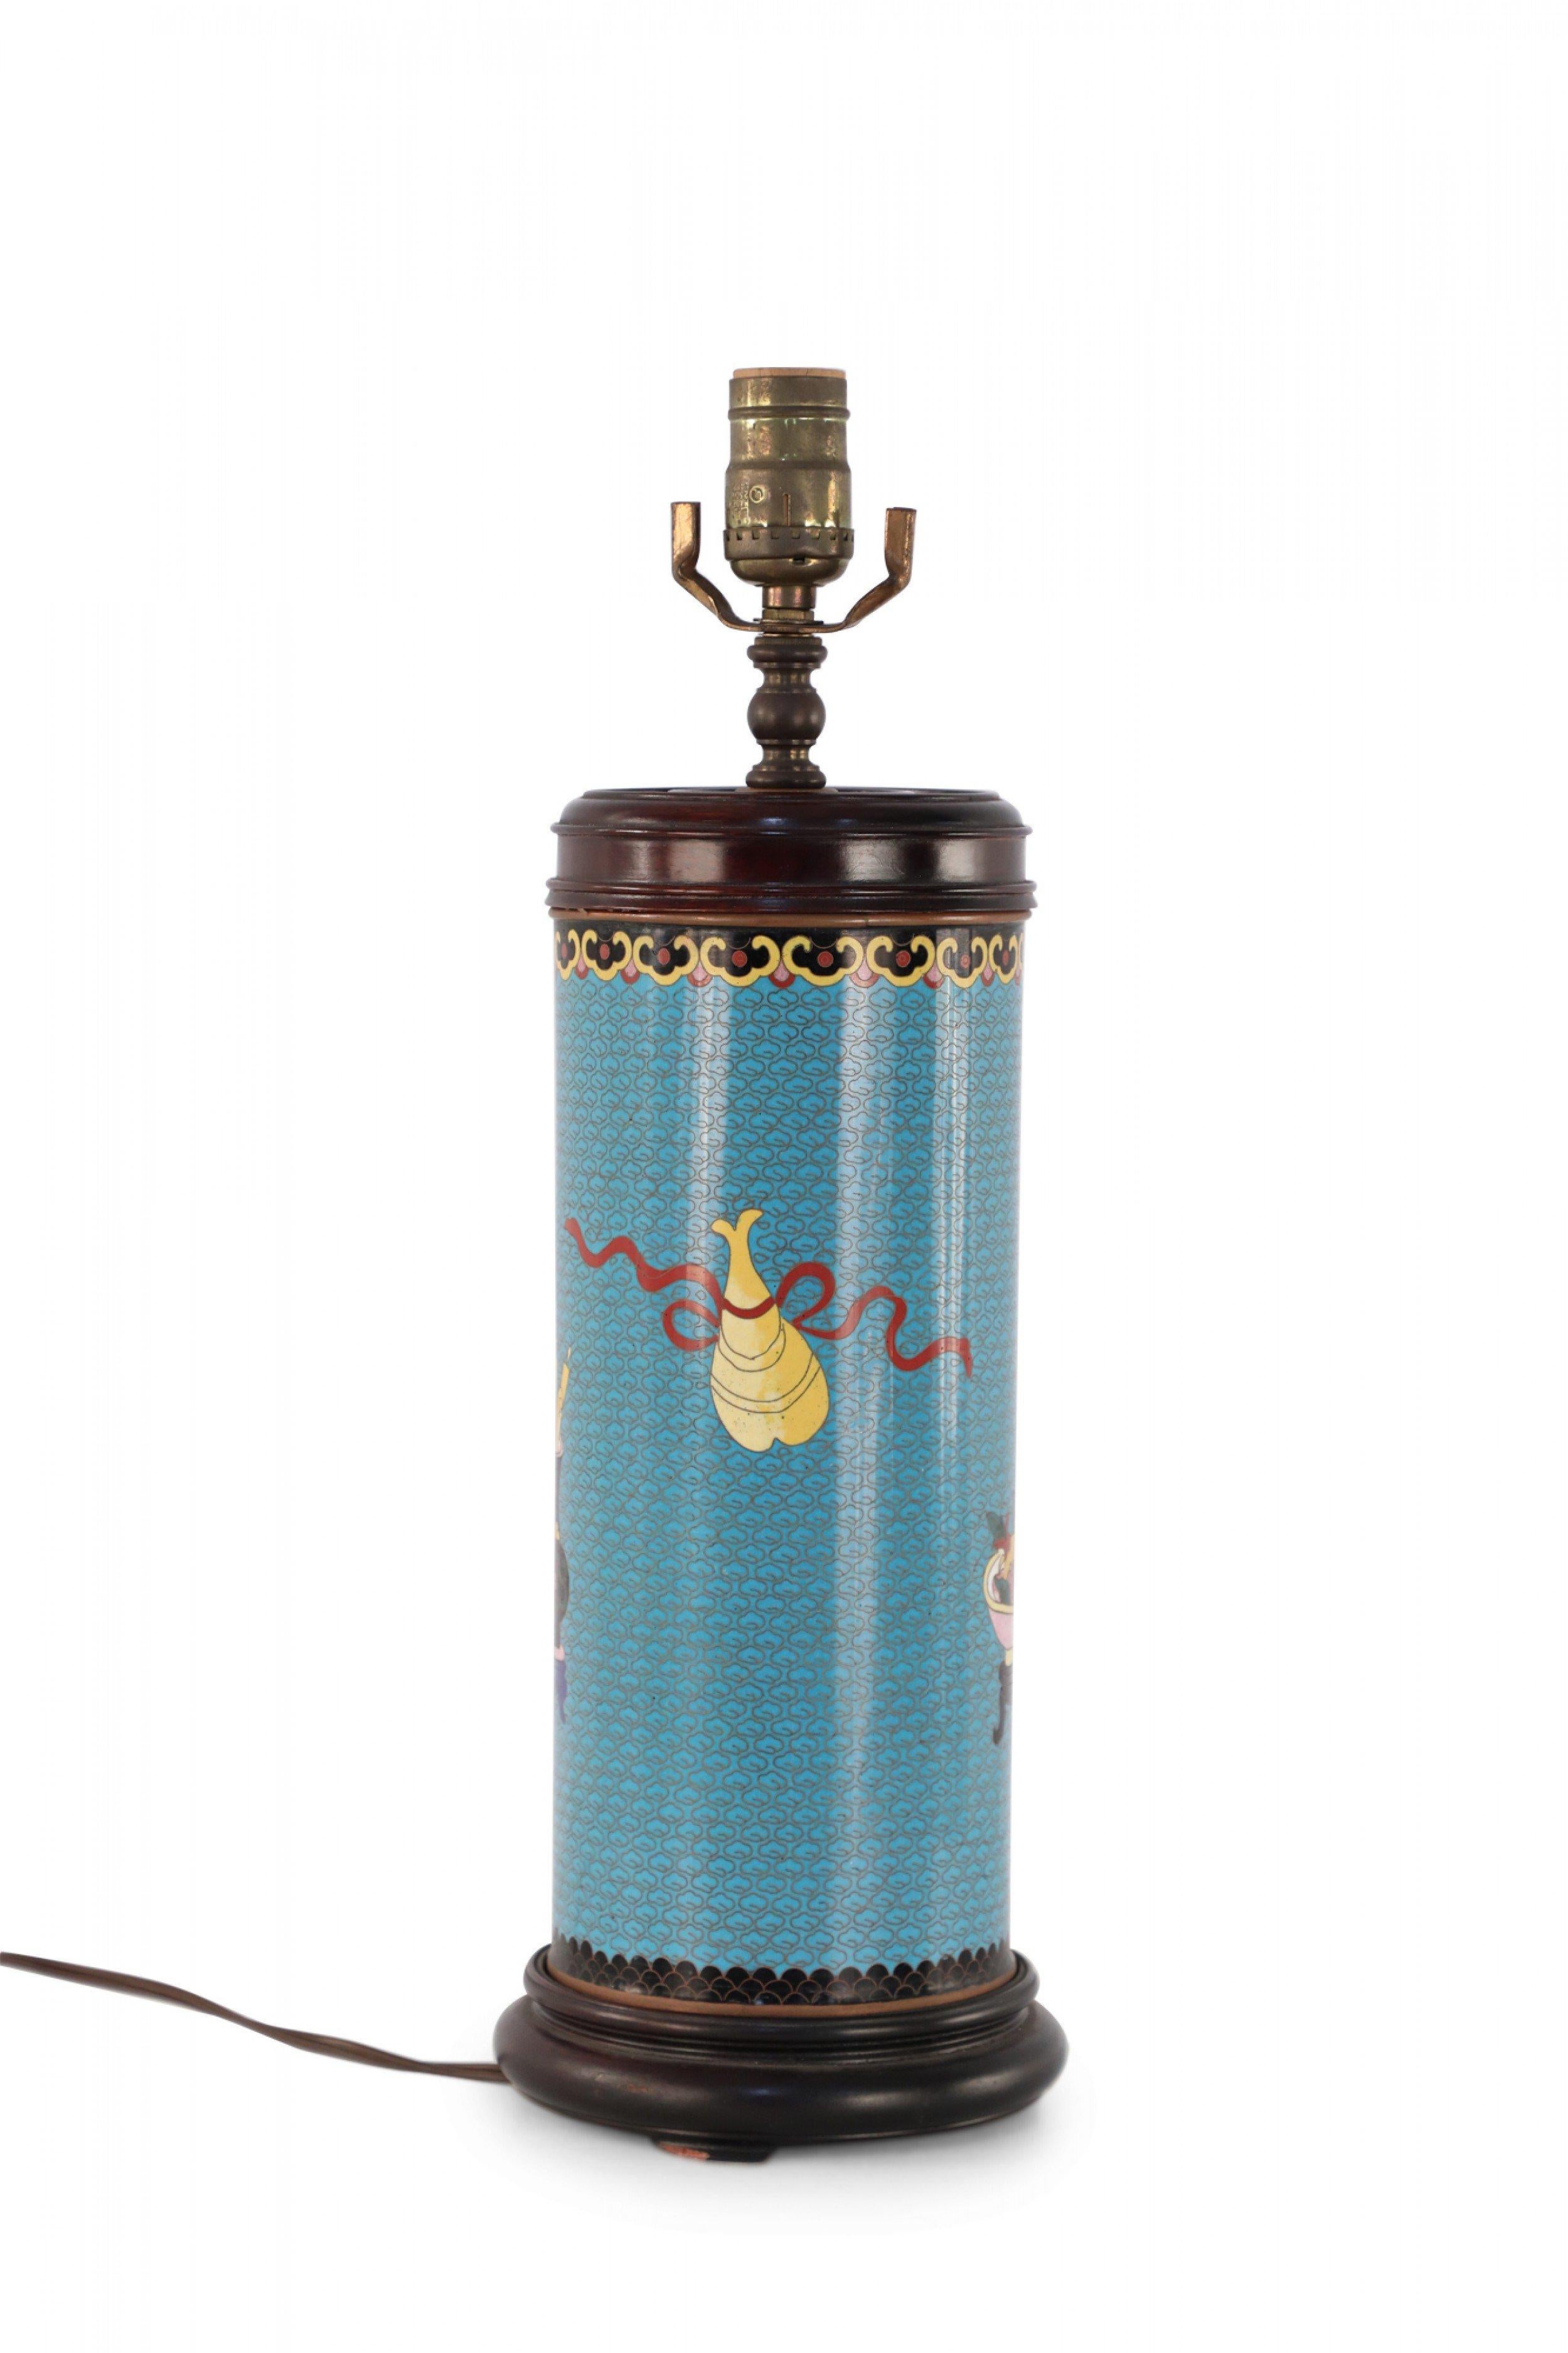 Chinese cylindrical table lamp made from a teal and gold-patterned cloisonne vase painted with floral arrangements and fruit bowls with a brown wooden base and top and brass hardware.
 